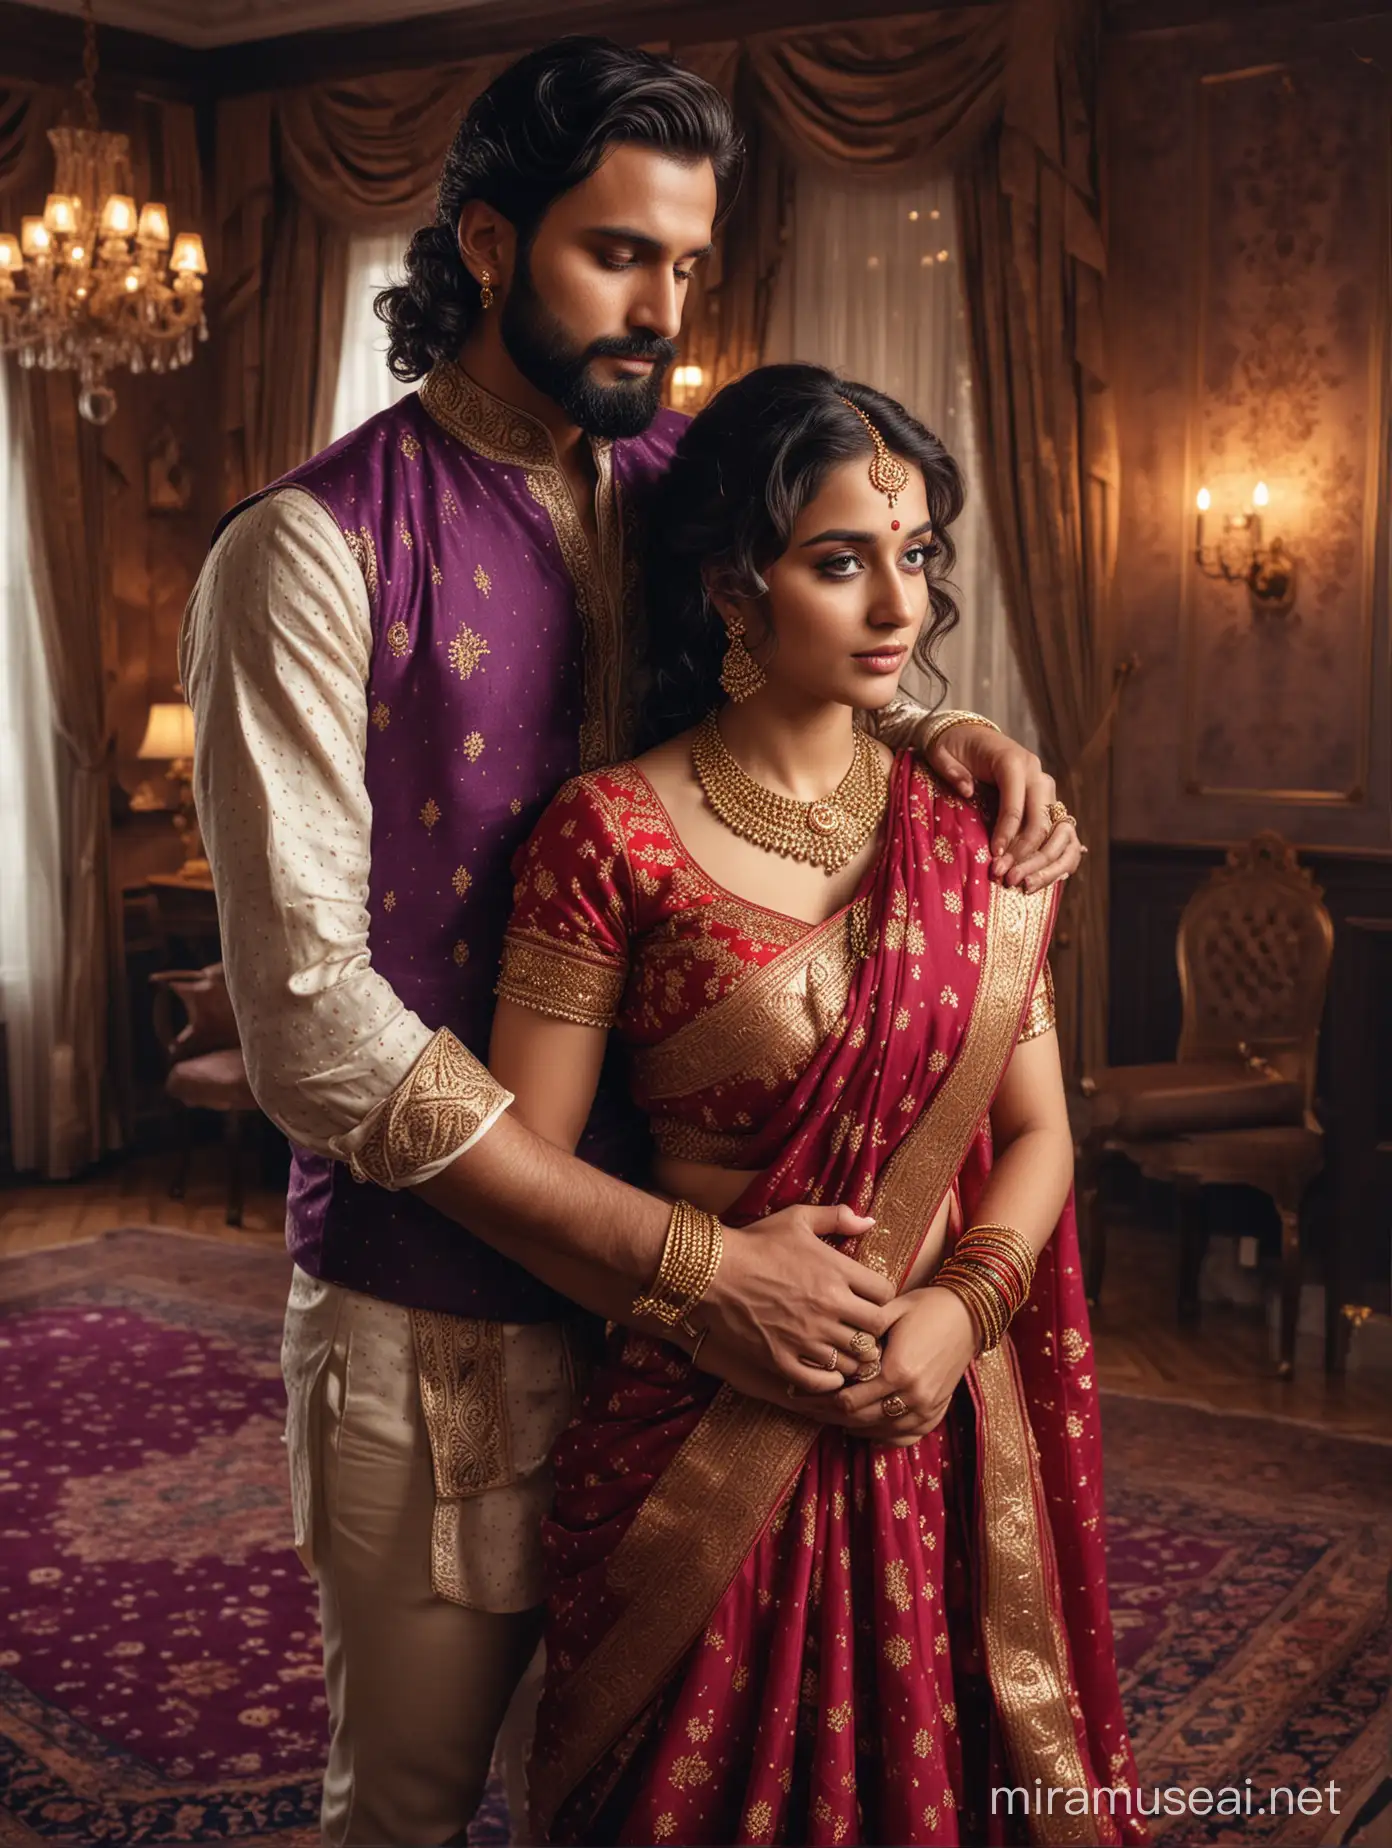 full body view portrait photo of most beautiful european couple as most beautiful indian couple, 28 mm lens, waist shot, most beautiful cute girl in elegant saree, bold color, wide black eyes, full face, girl has long curly hair falling on breasts, full makeup, bridal makeup, perfect red dot on forehead, full jewelry, hair ornaments, antique gold necklace, blouse low cut, man embracing girl and resting forehead on chest of girl  with deep emotion, girl  comforting man with hands around him, man with stylish beard and perfect hair cut, formals  and tie, ultra  photo realistic, intricate details, 
background, vintage lamps, dark low lighting  palace interior ambiance, purple color carpet, interior designs, big window for outside view, romantic atmosphere, intricate details, 8k.